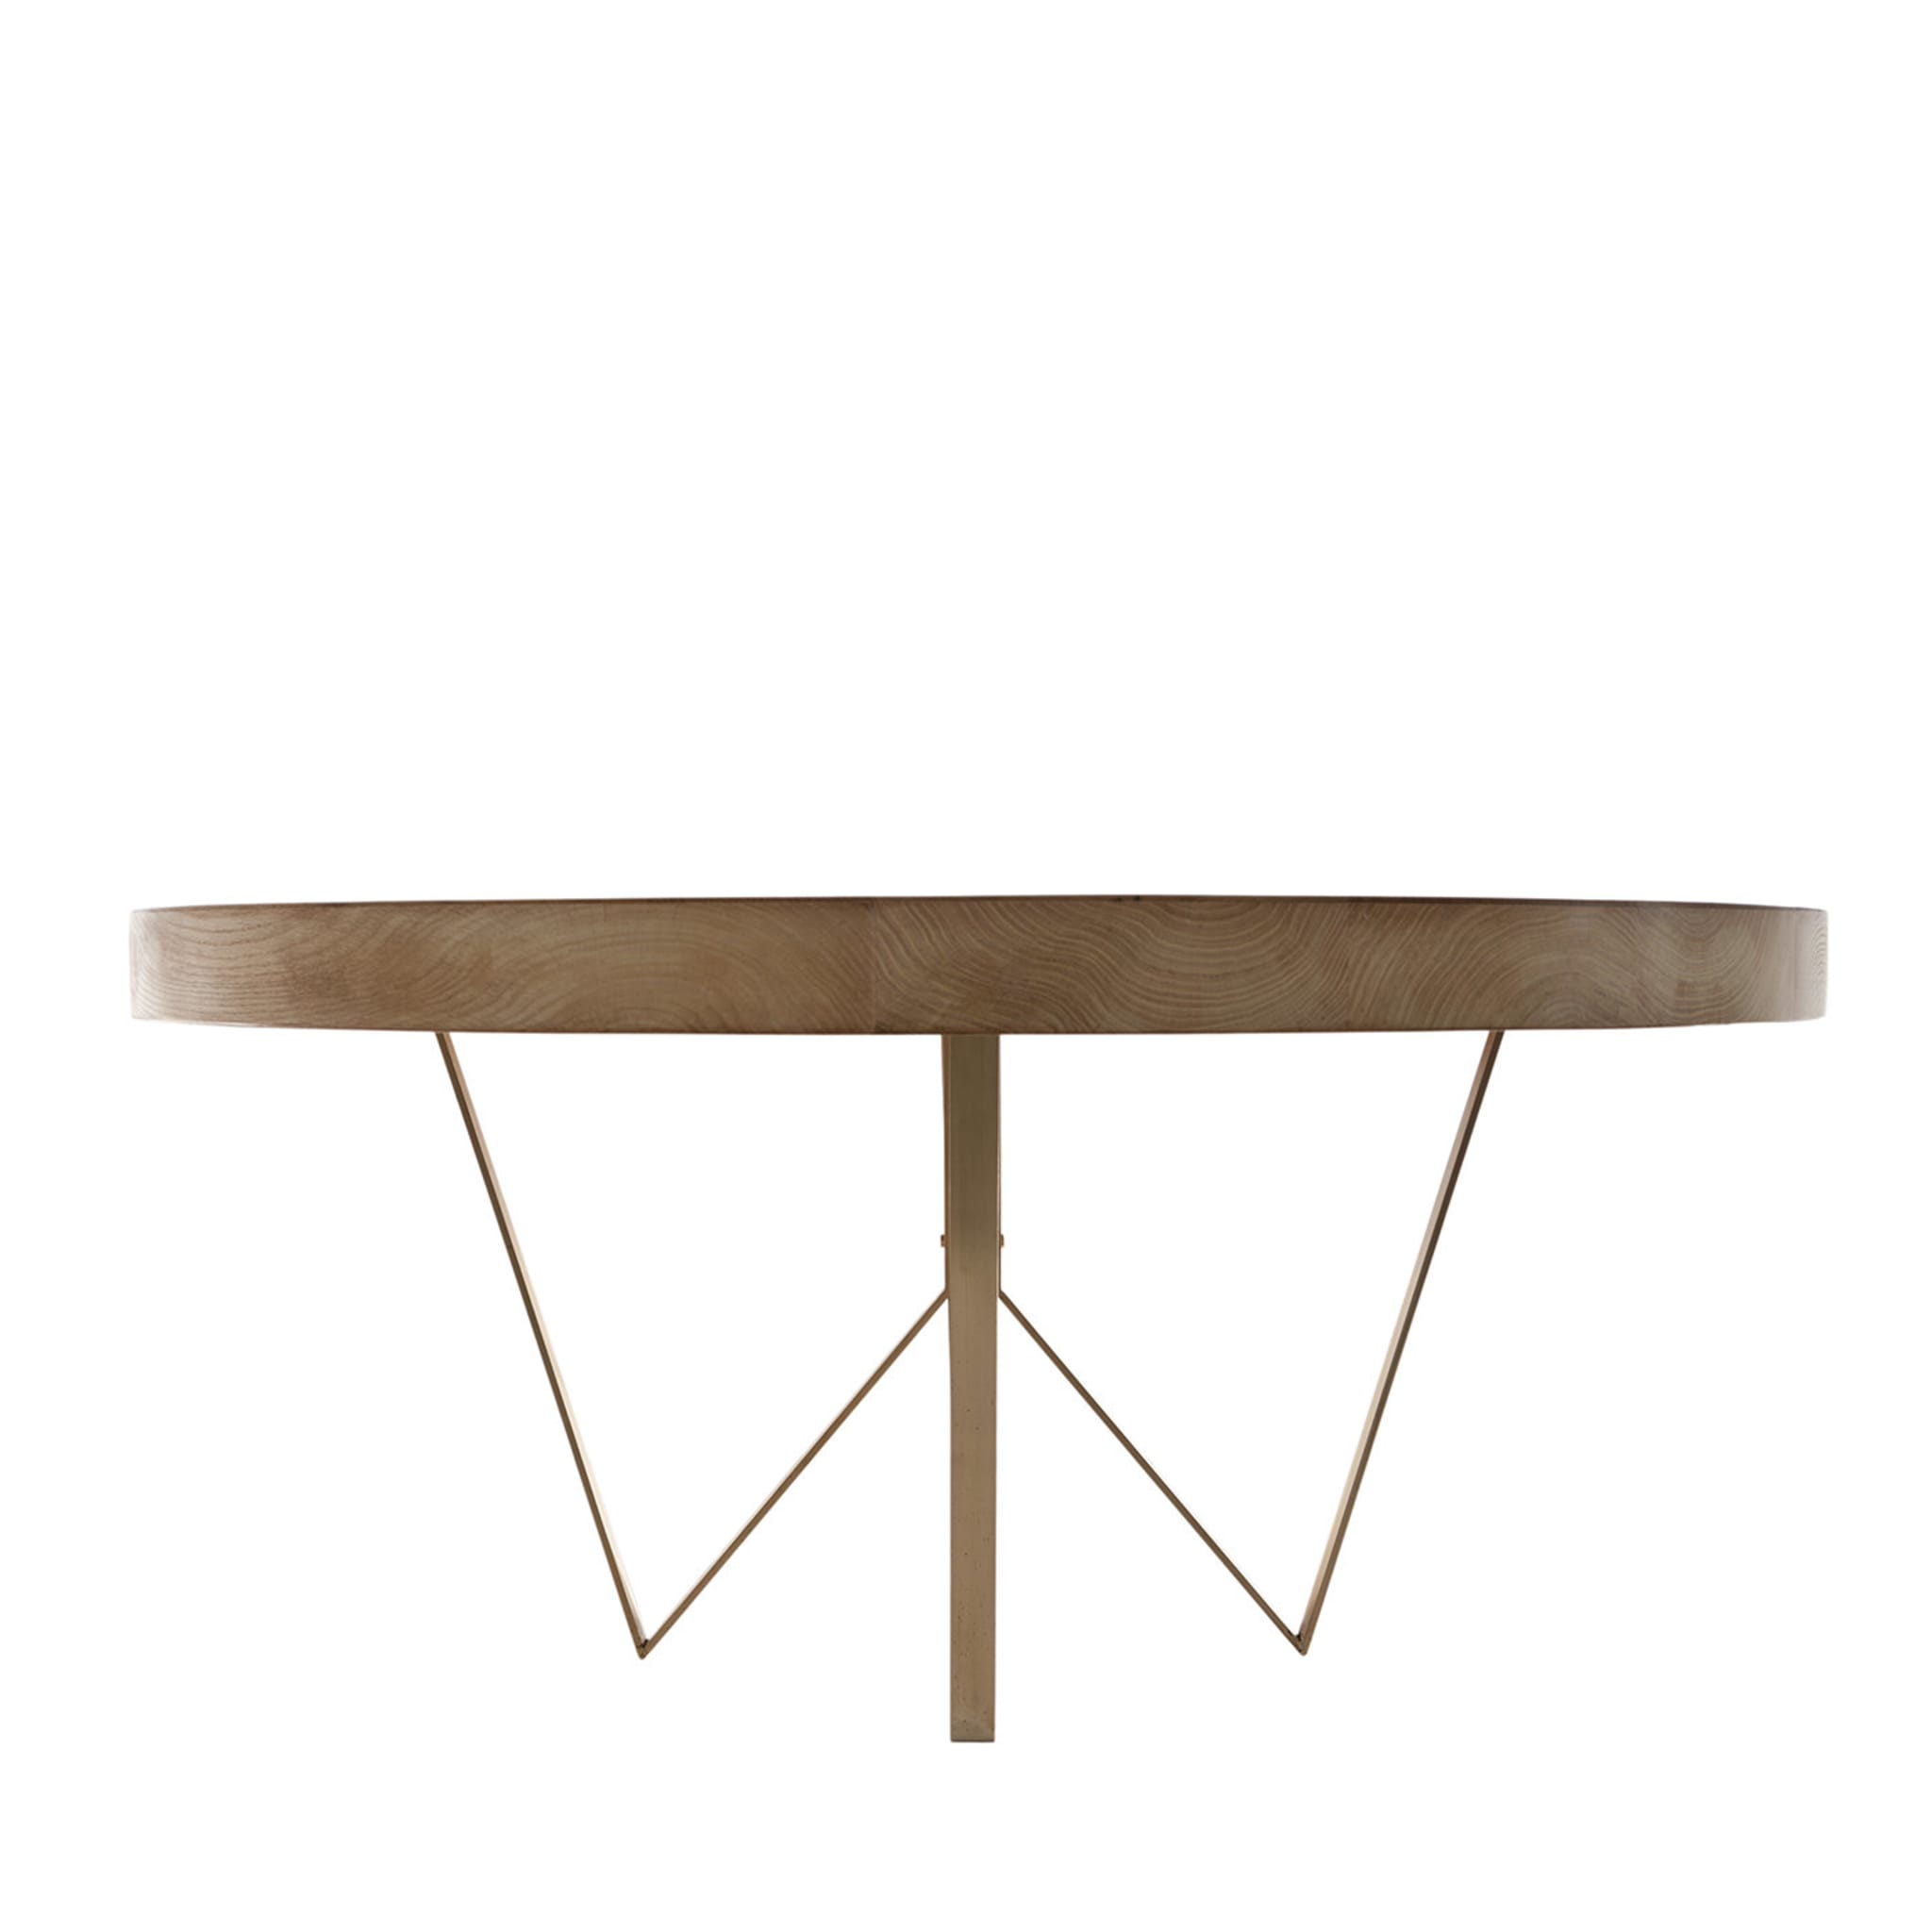 Maurits Round Dining Table with Brass Base - Alternative view 2